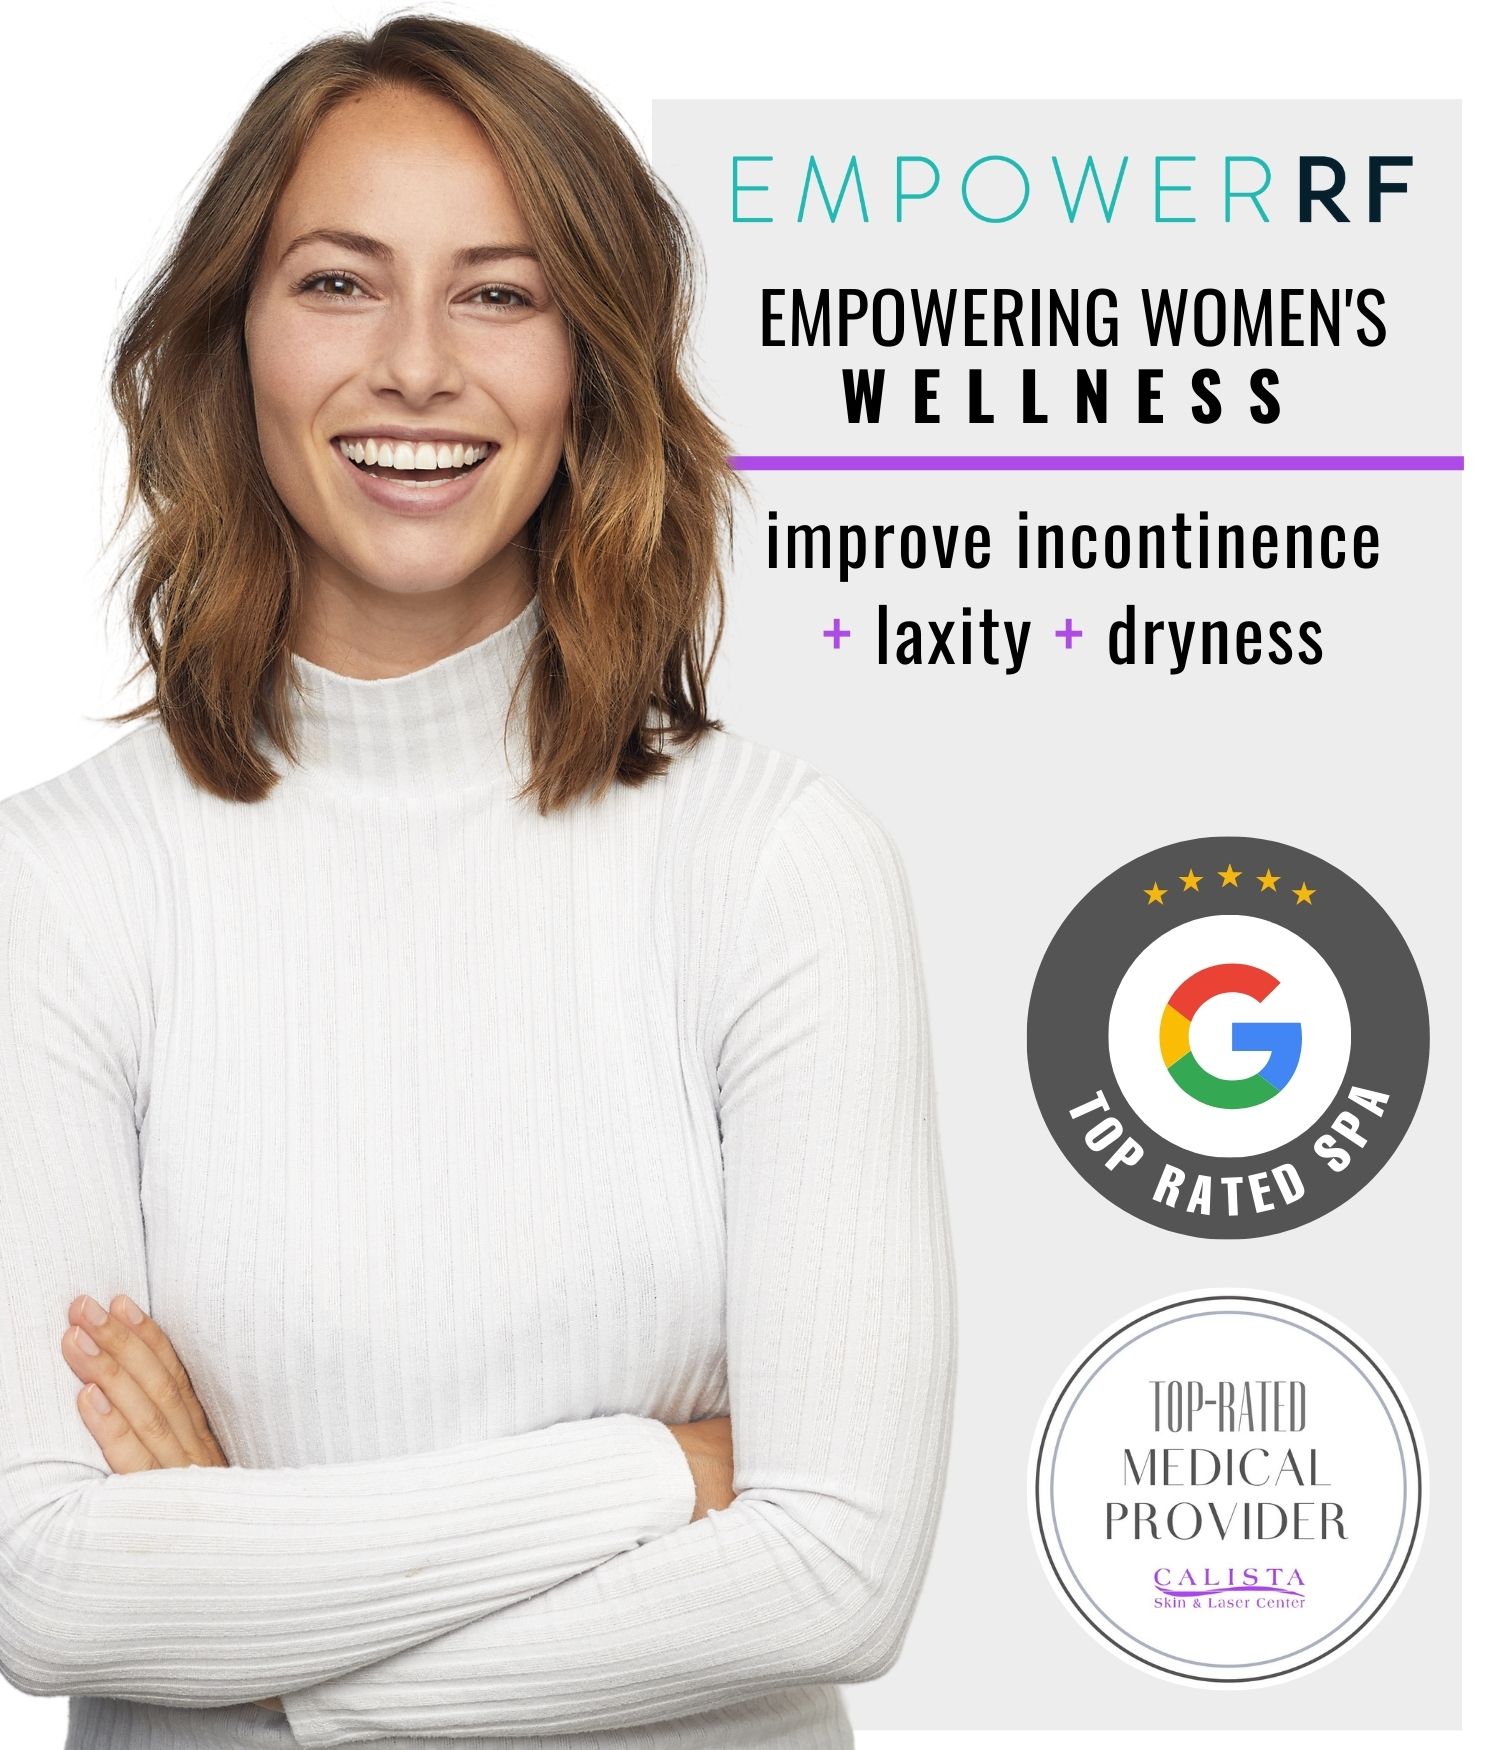 Smiling healthy woman promoting EMPOWER RF Women’s Wellness Treatments